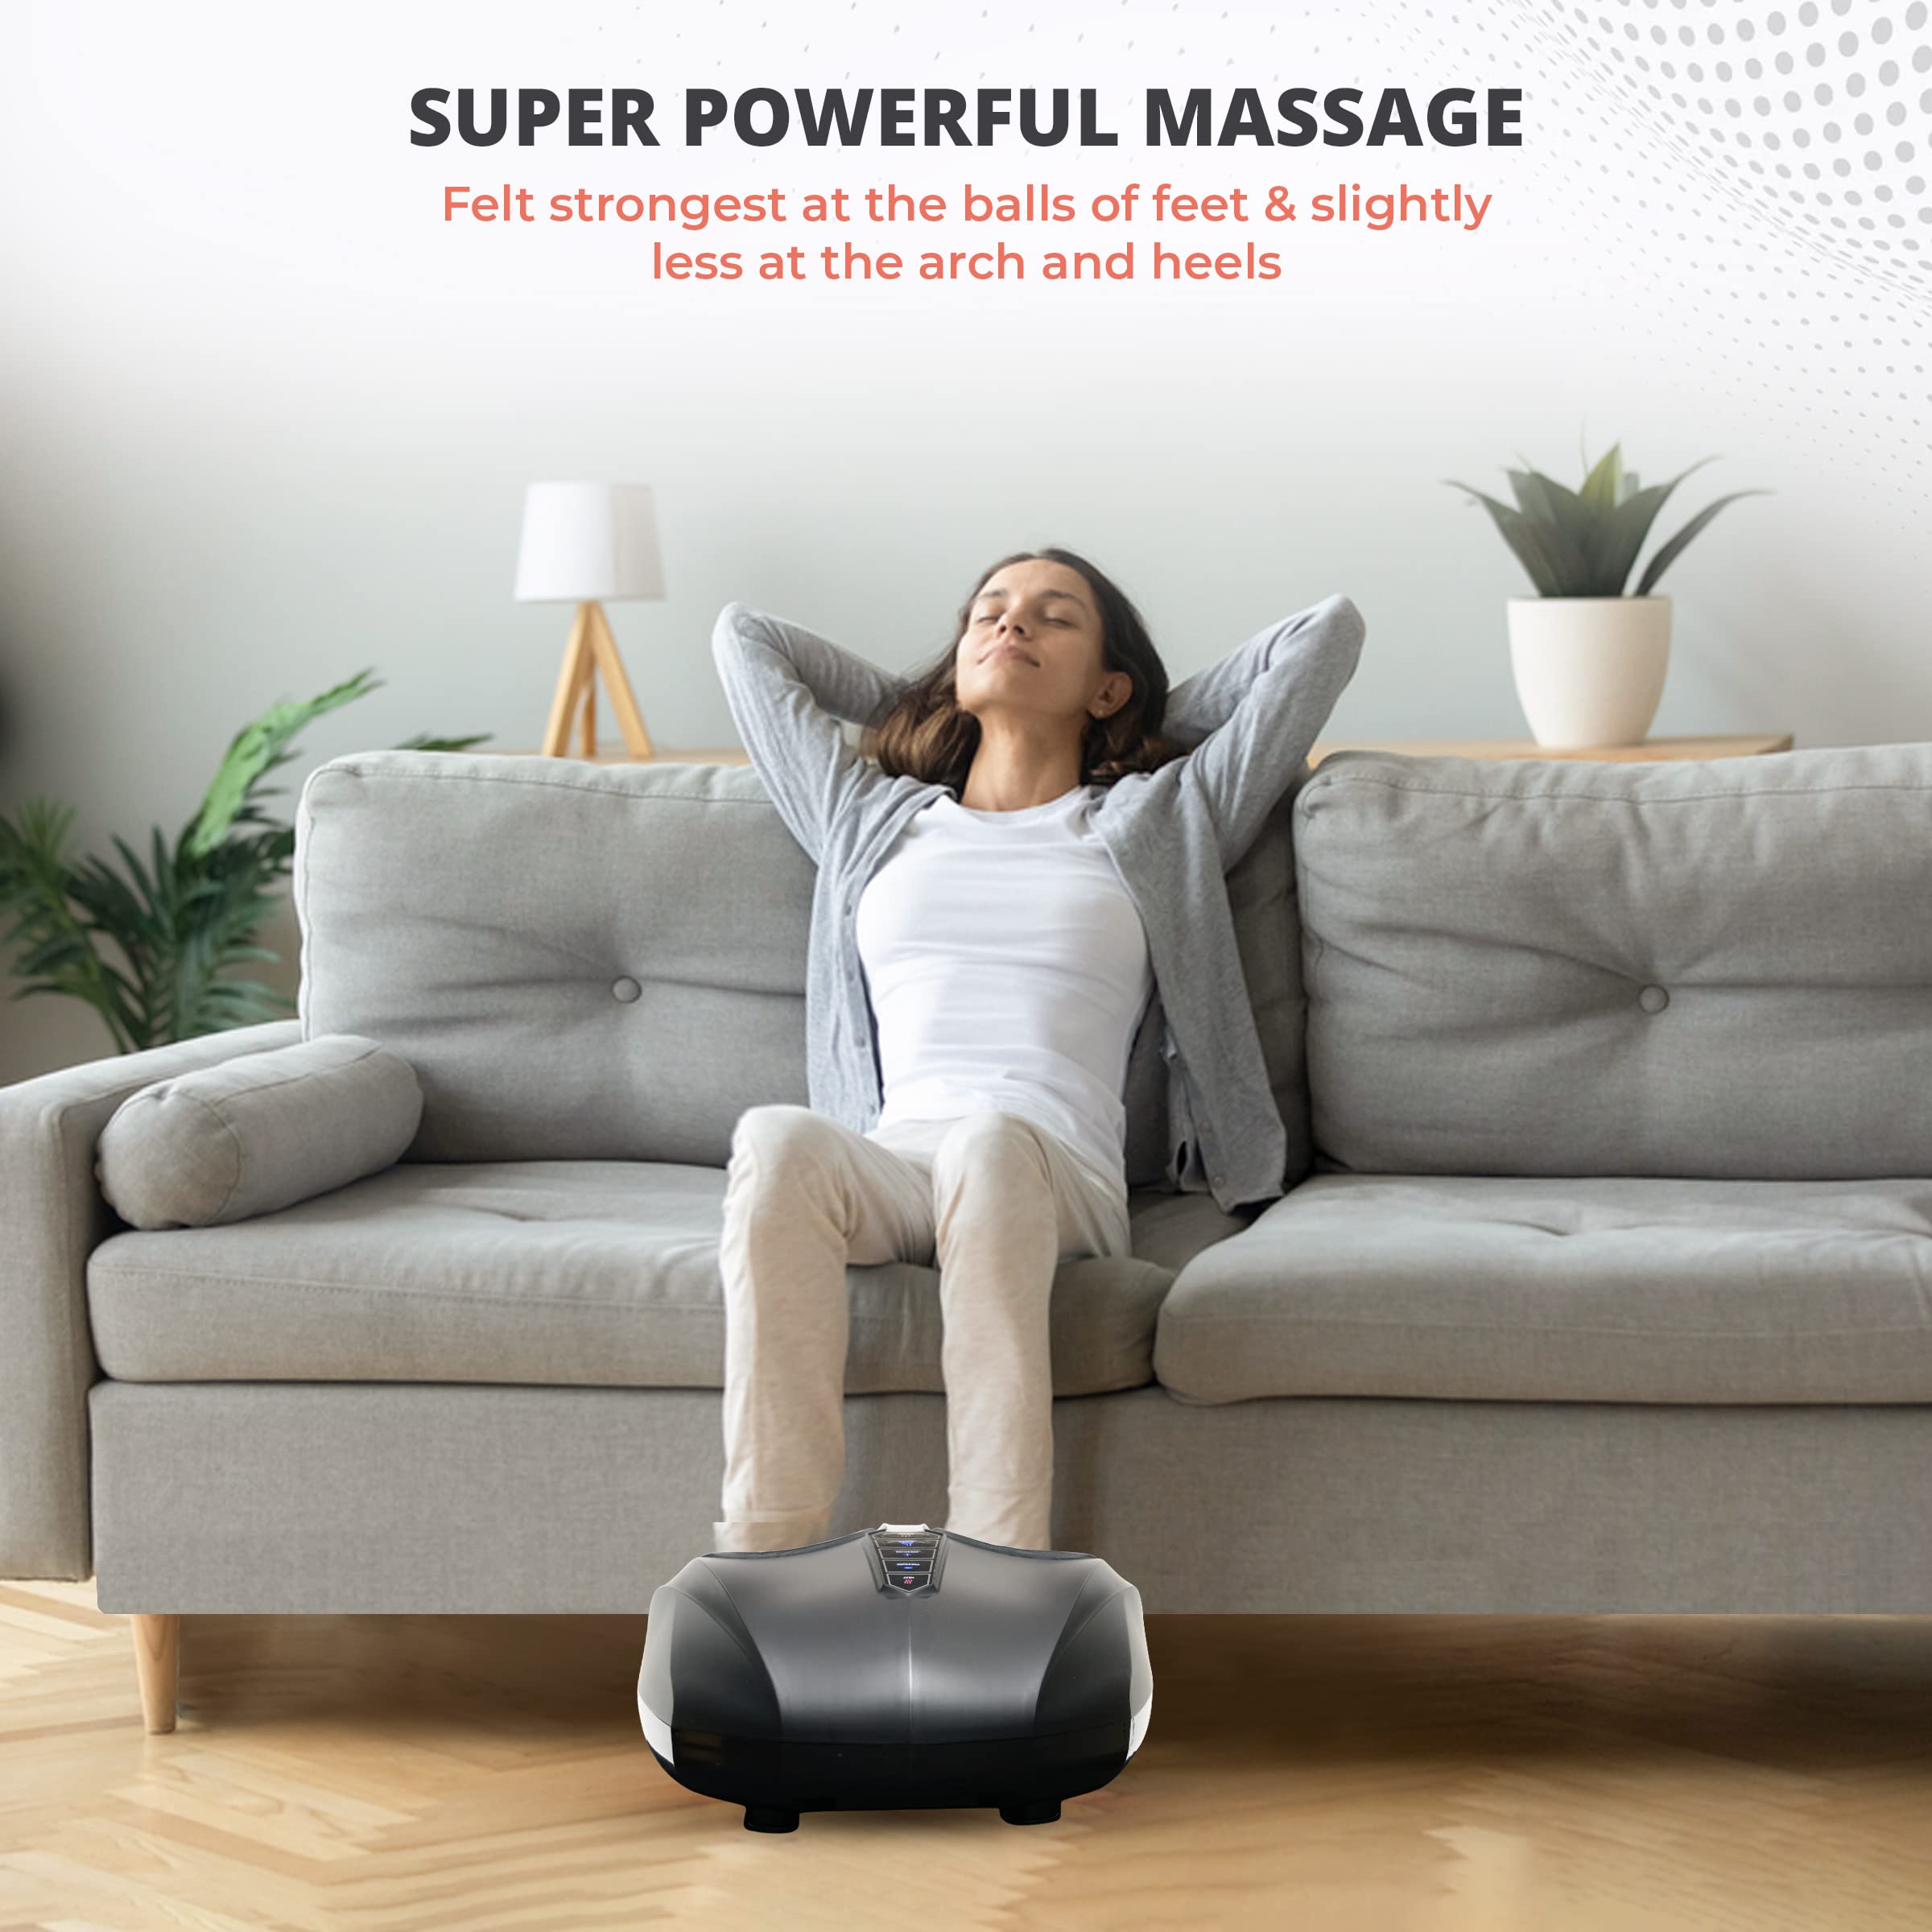 Belmint Foot Massager for Relaxaton - Great Gift Idea for Him/Her - Great Father's Day Gift  - Very Good